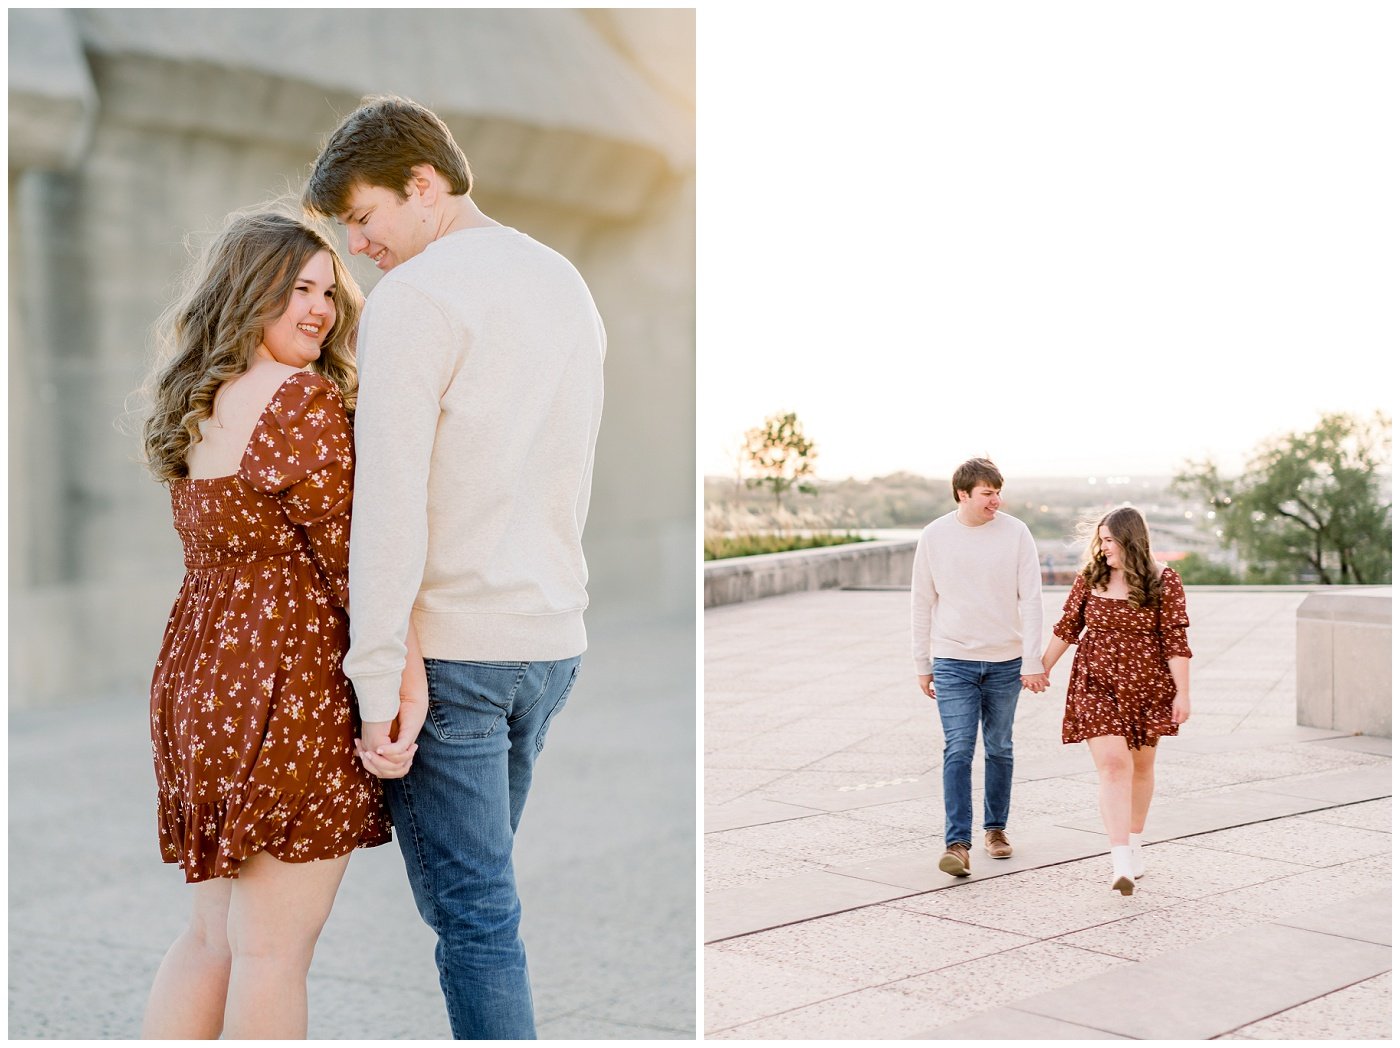 Kansas City locations for engagement photos